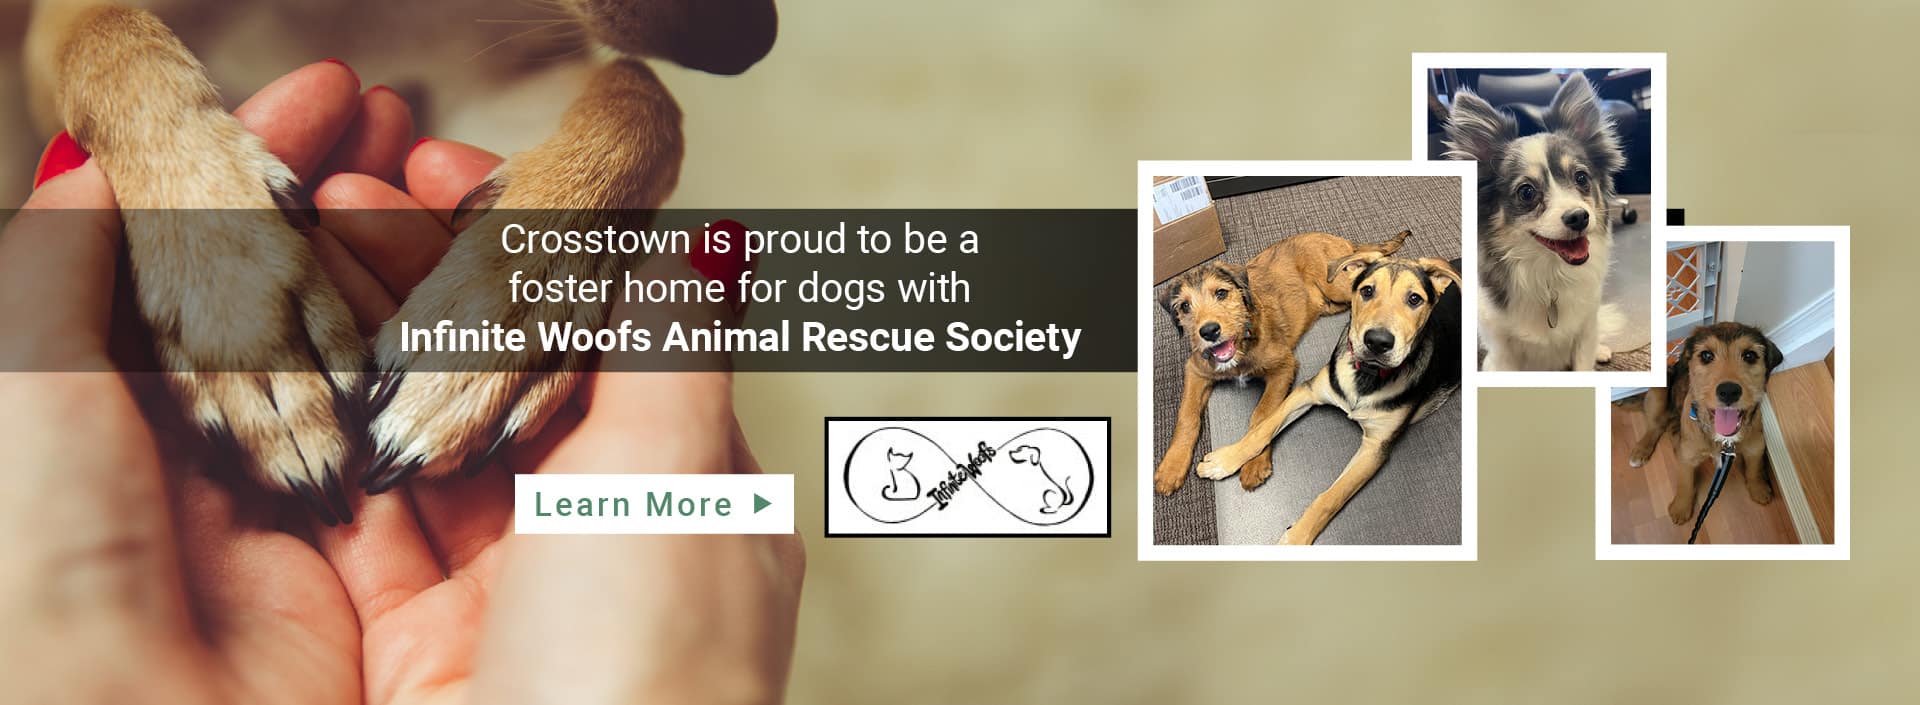 Crosstown is proud to be a foster home for dogs with Infinite Woofs Animal Rescue Society